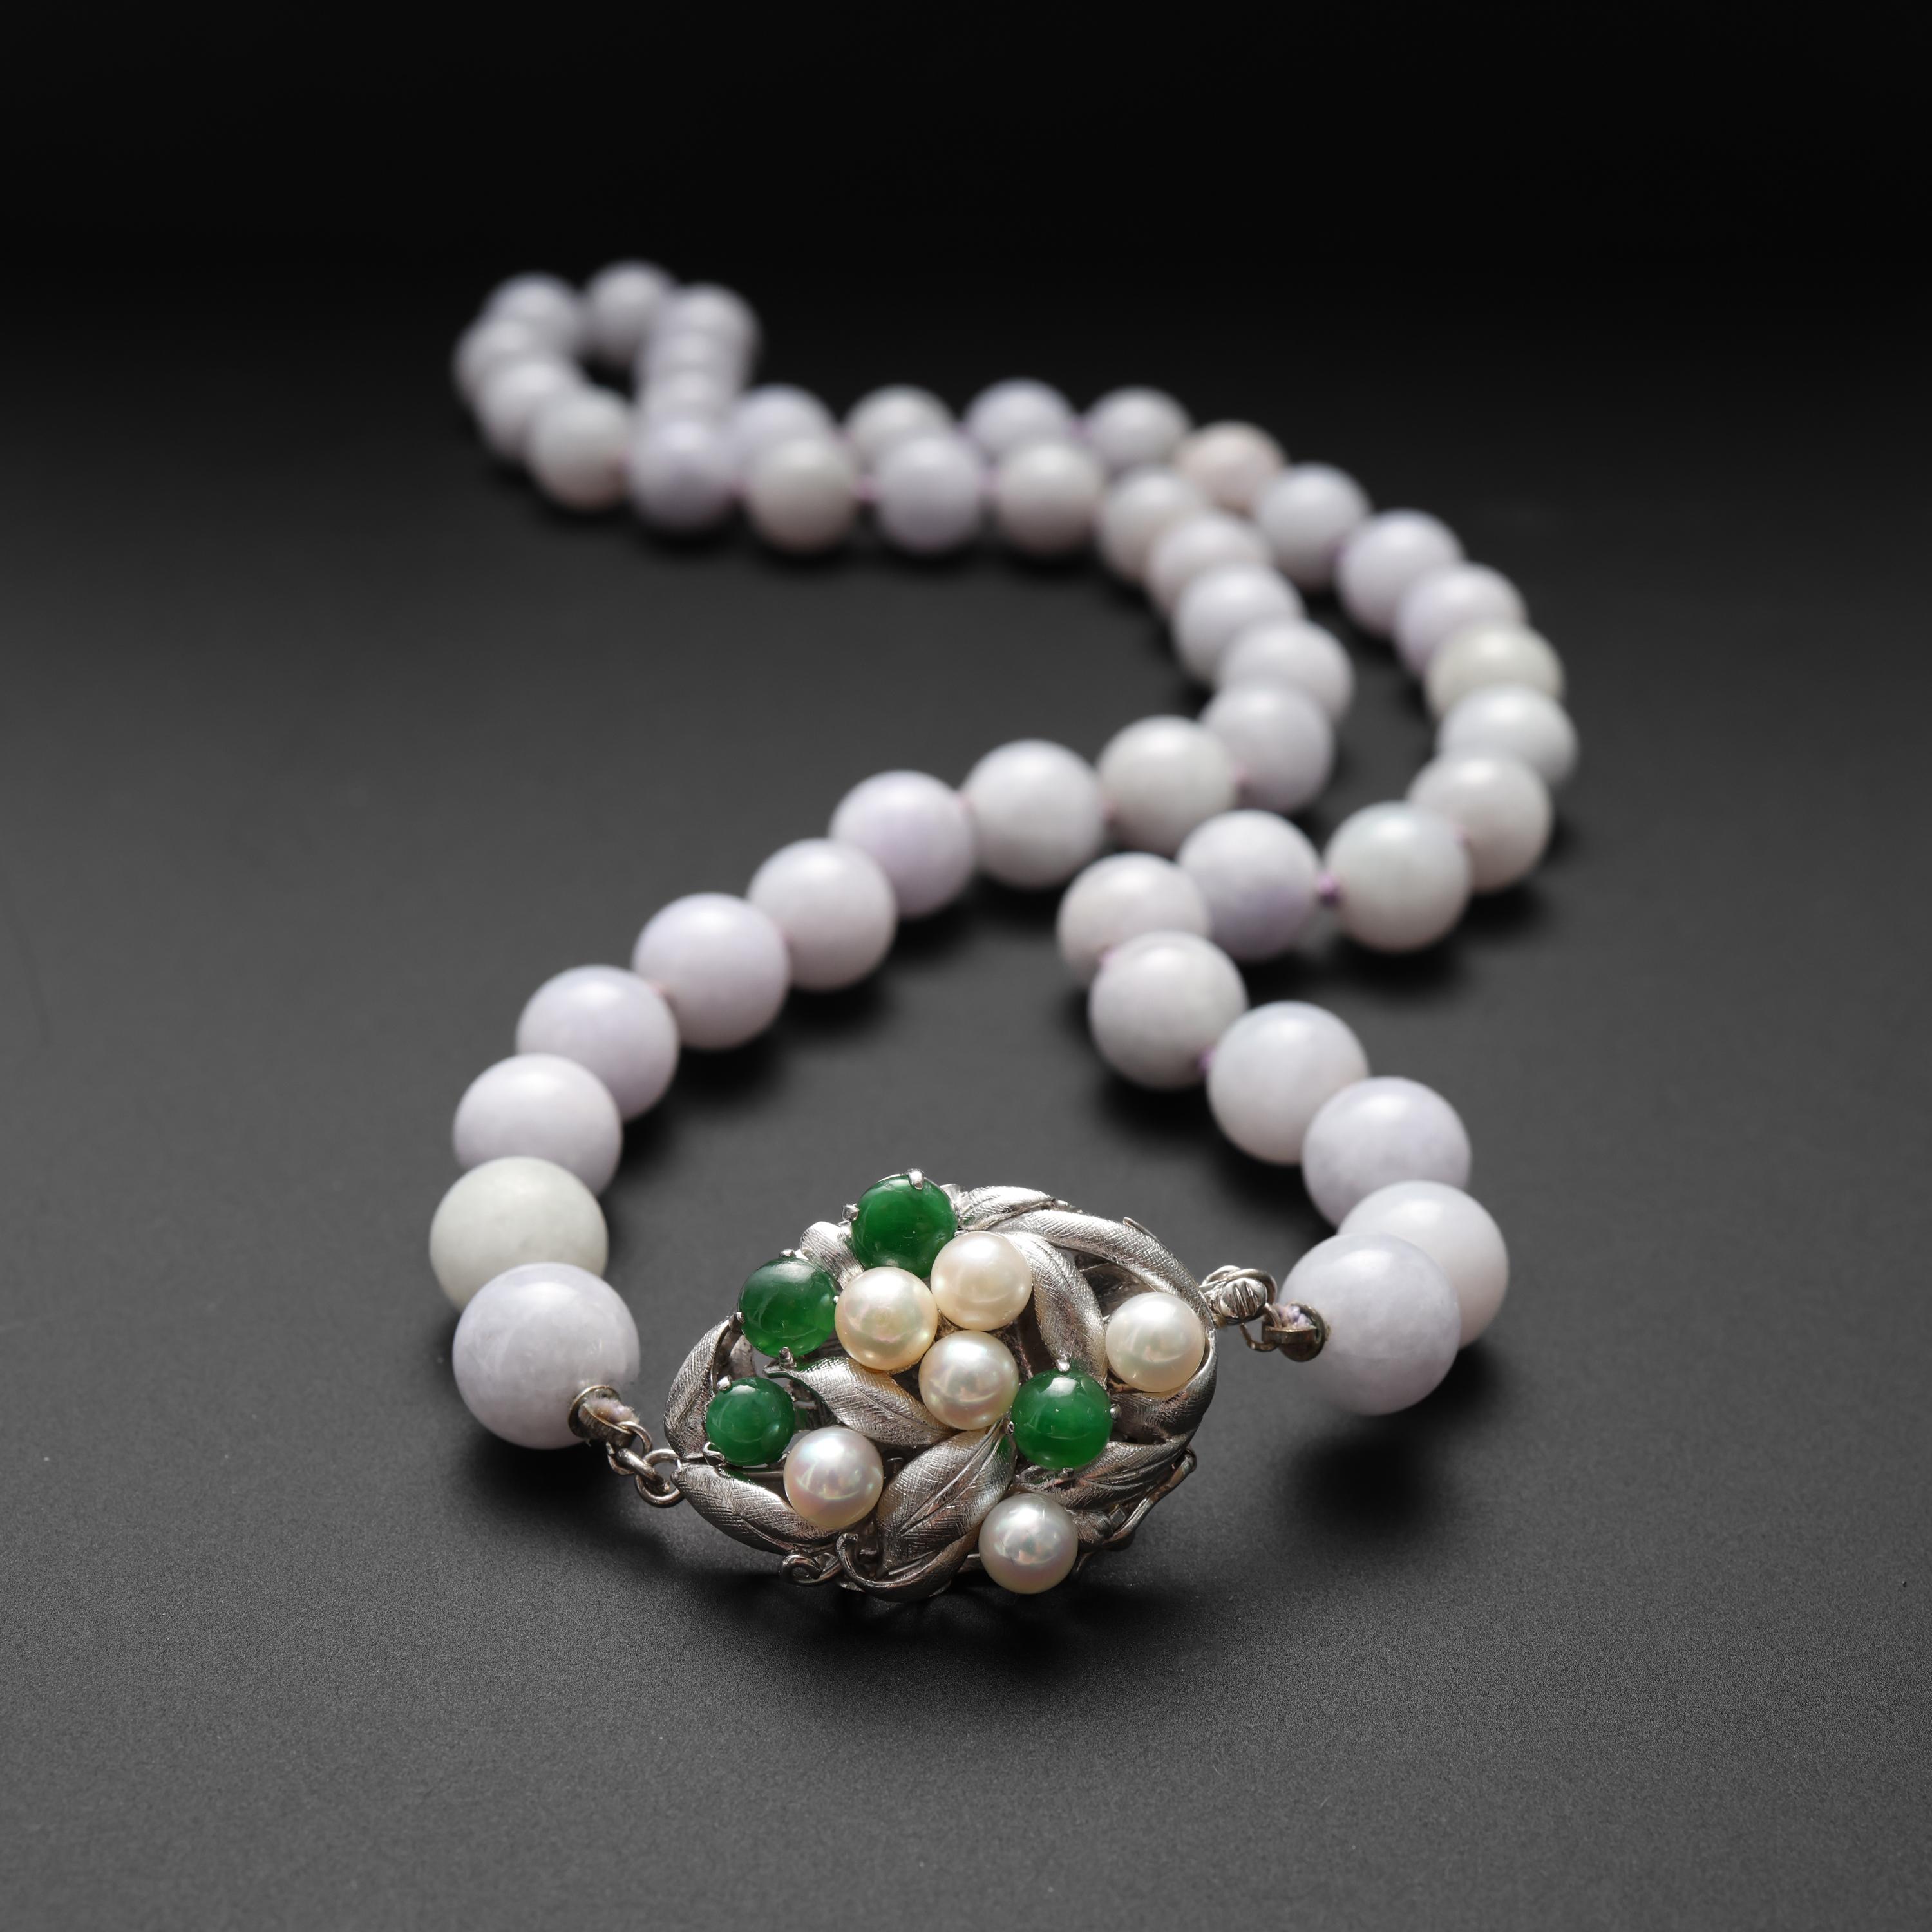 This gorgeous certified natural and untreated Burmese jadeite jade necklace is composed of 45 10mm hand-carved and polished light lavender jade beads. As with most lavender jade, the stones are opaque yet somehow still luminous. The gem lab